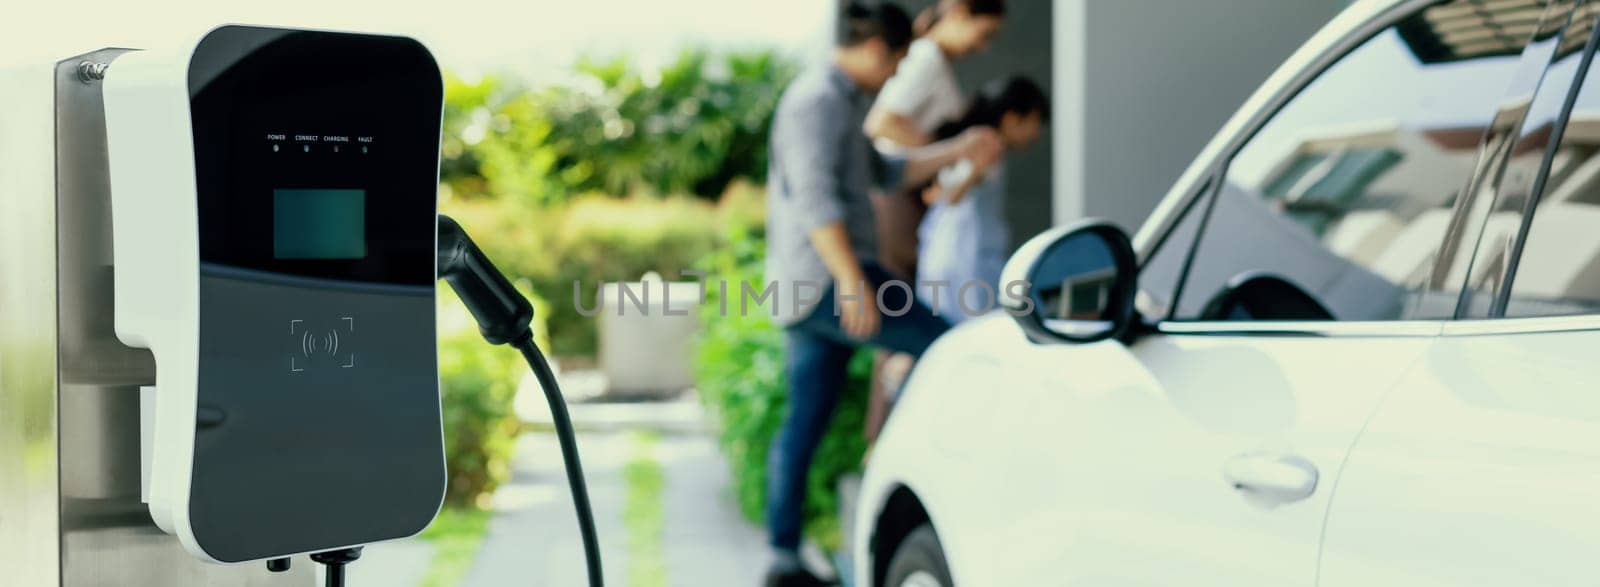 Focus closeup electric vehicle recharging battery from home electric charging station with blurred family in background. Renewable clean energy car for progressive eco awareness lifestyle concept.